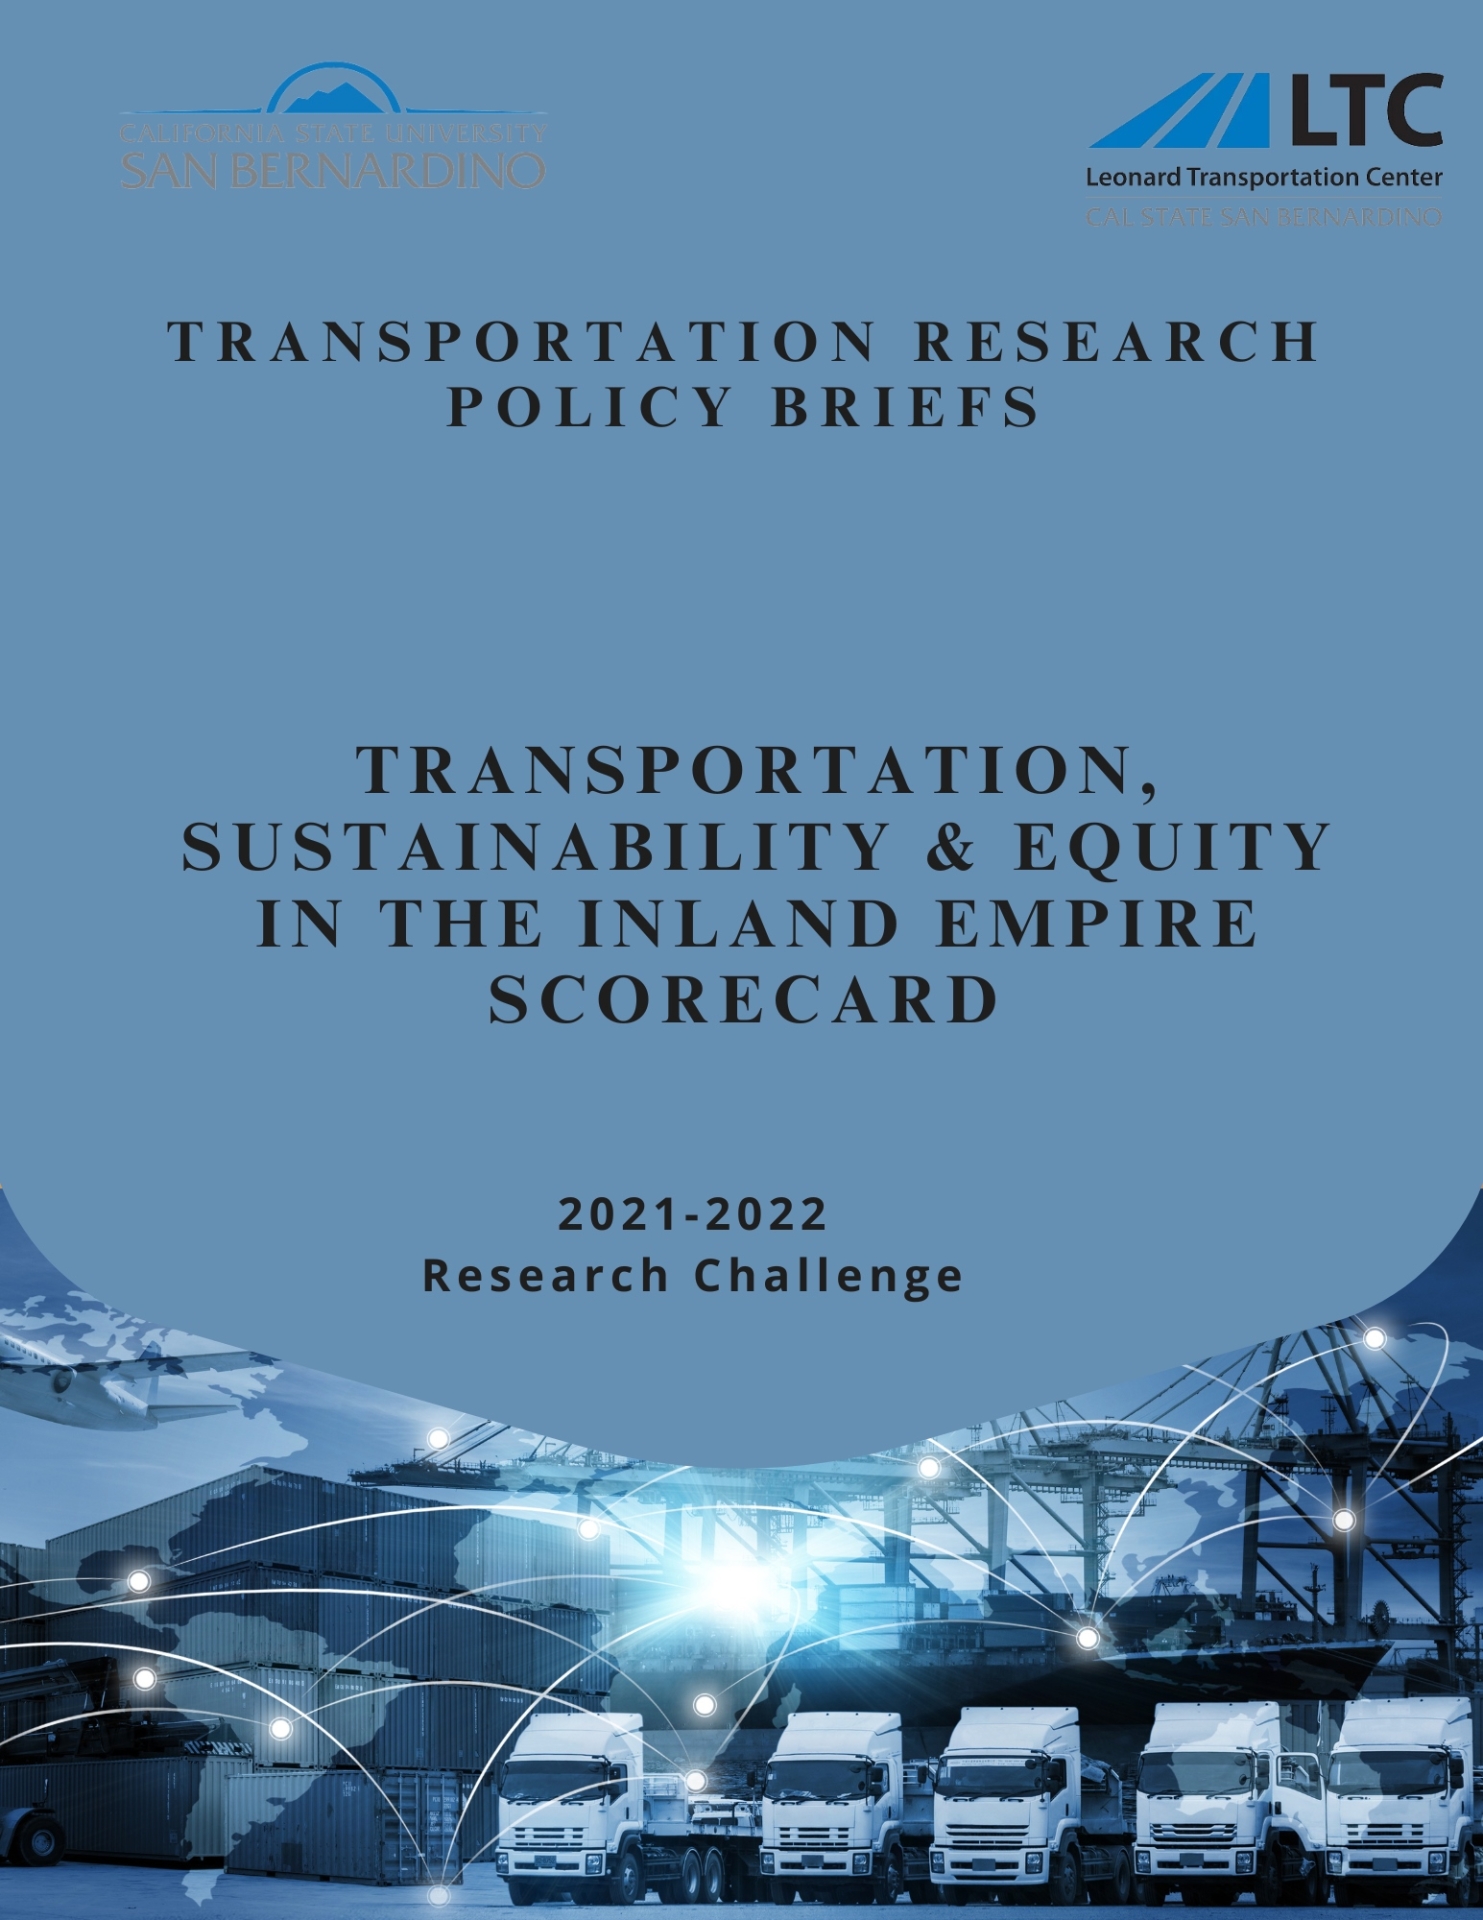 Transportation, Sustainability & Equity in the Inland Empire Scorecard